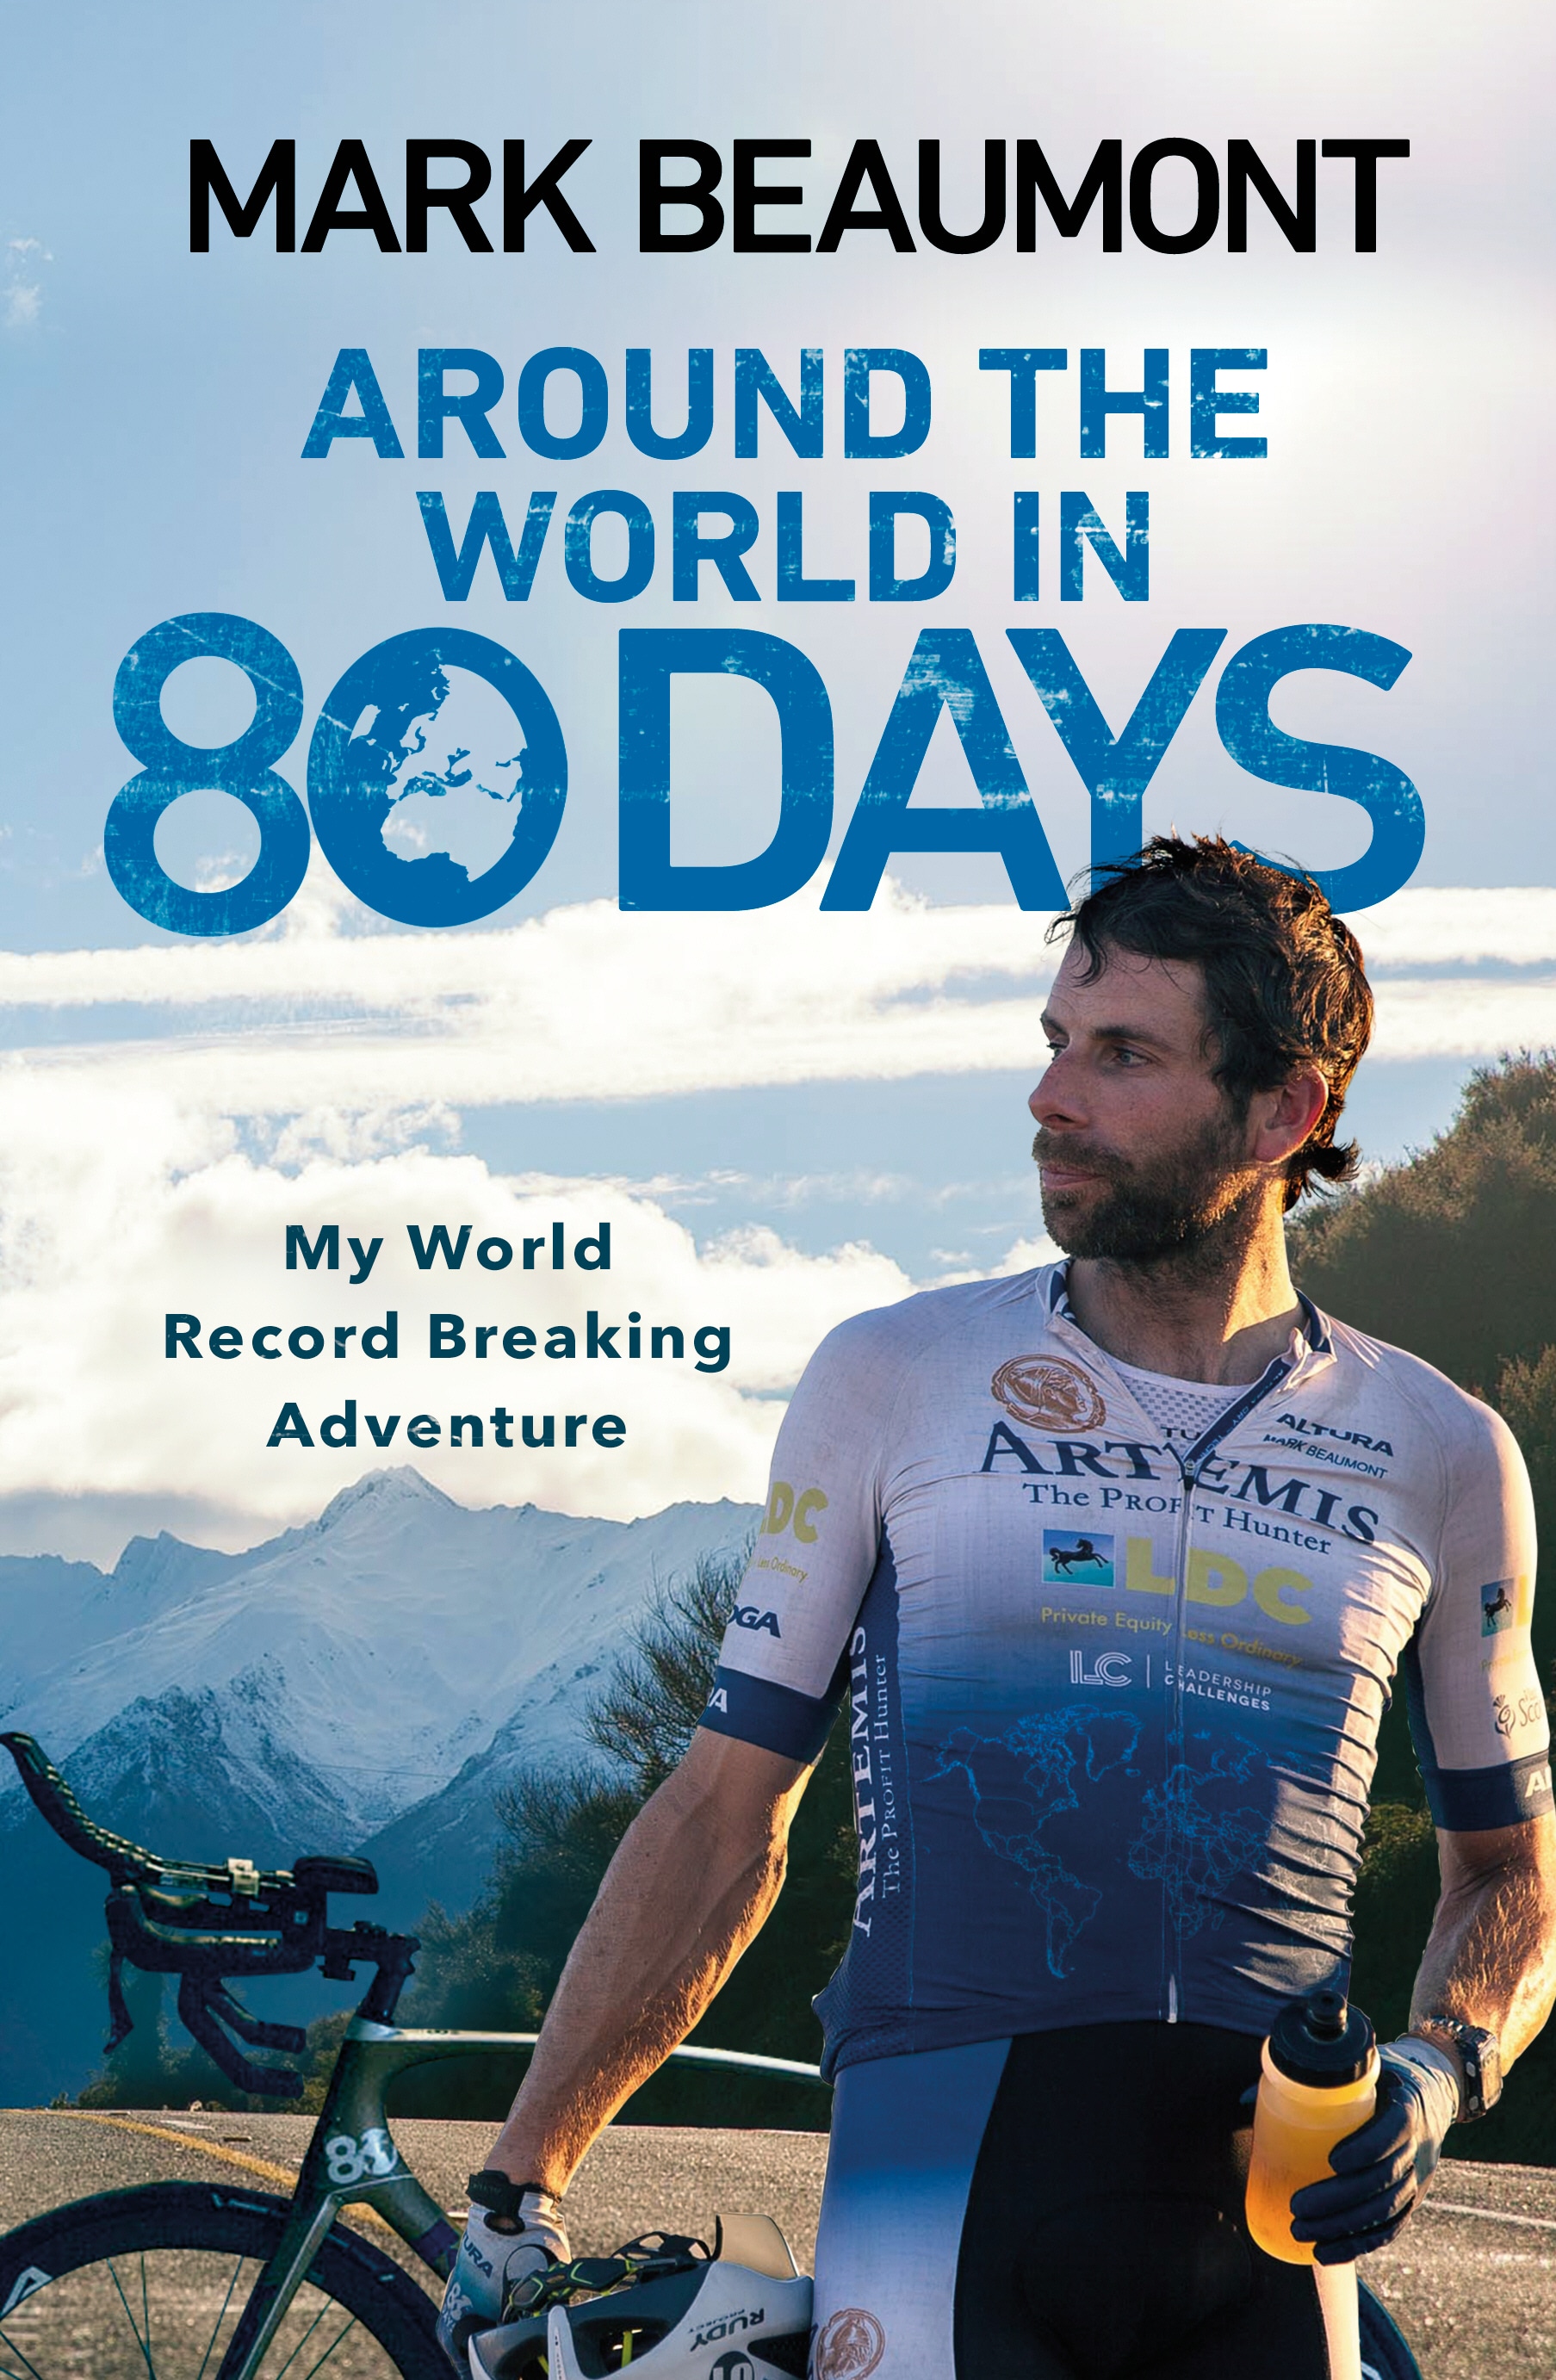 Book “Around the World in 80 Days” by Mark Beaumont — May 30, 2019